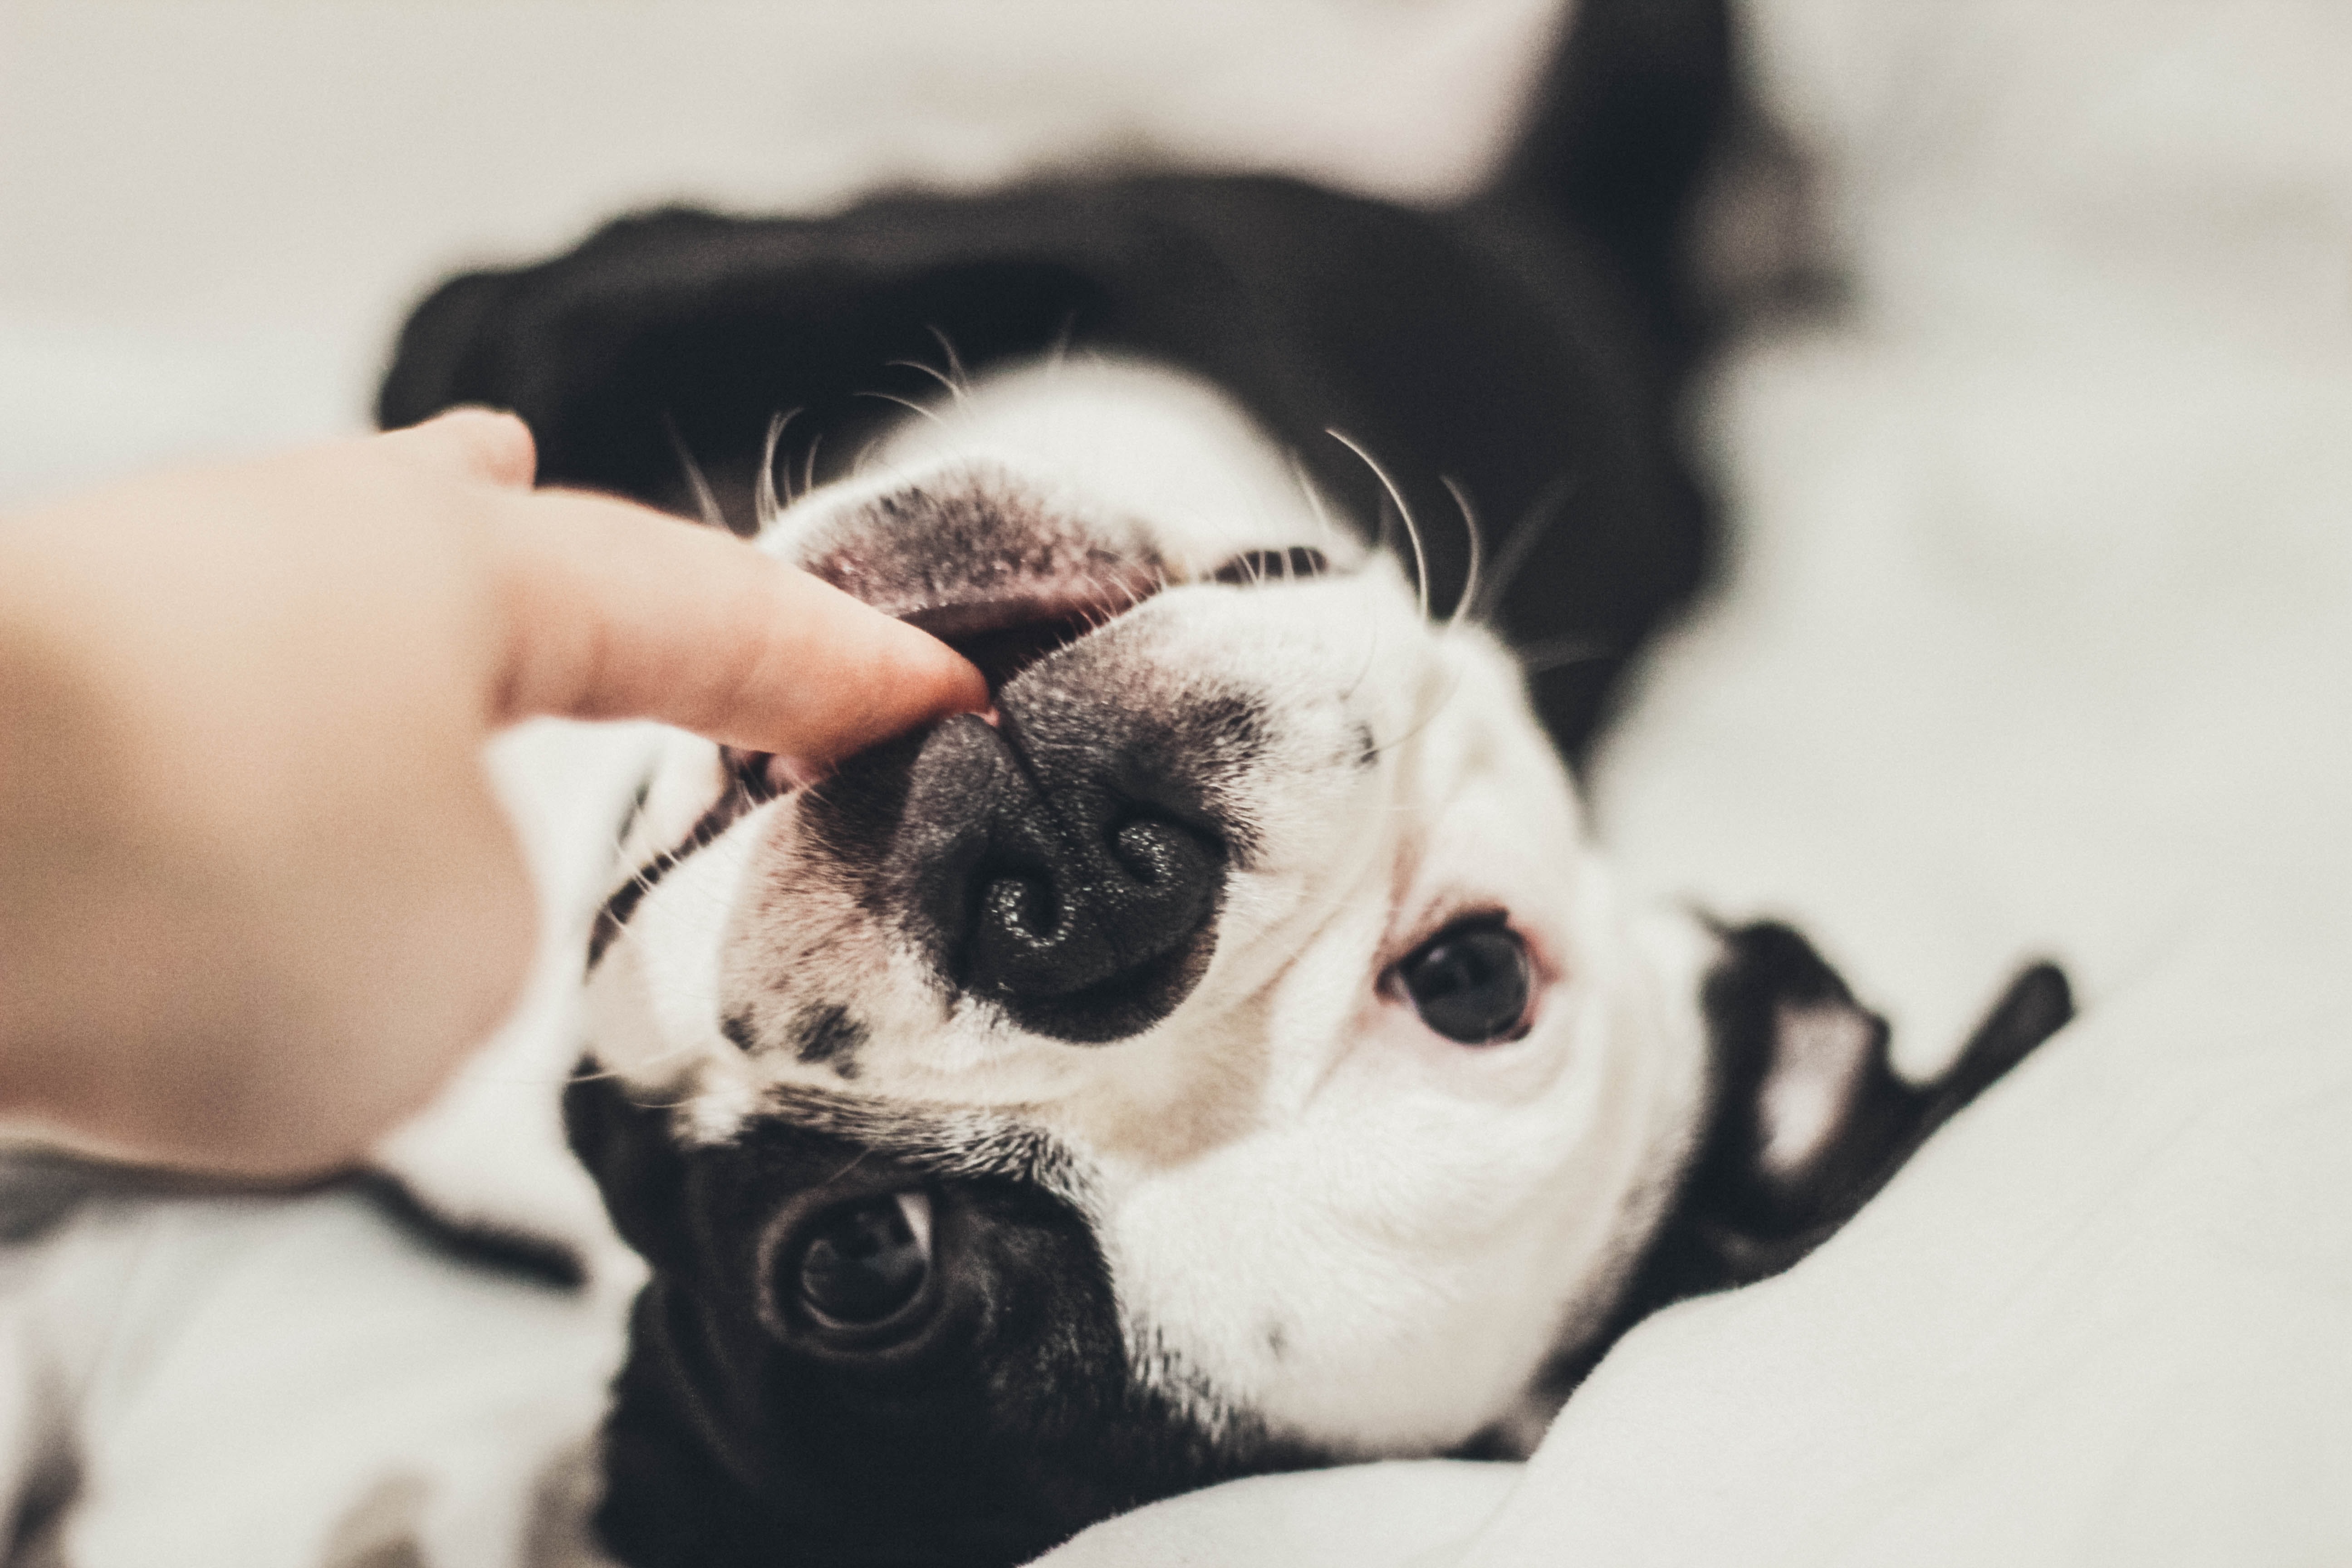 Boston terrier puppy biting a human finger in a playful way